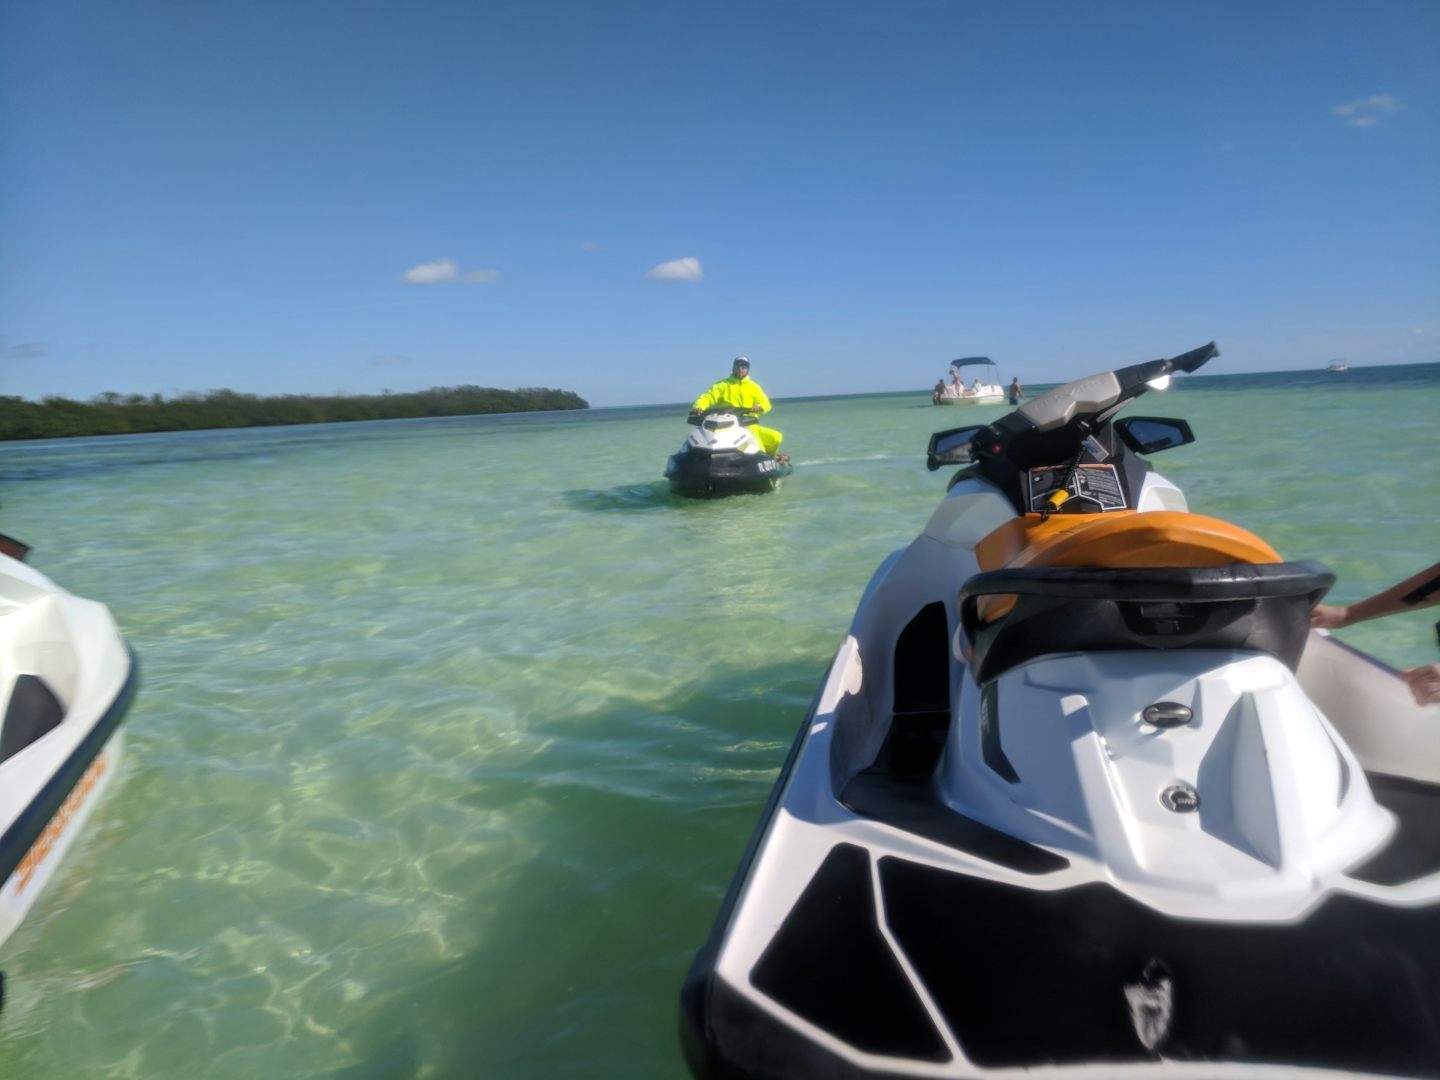 Jet Ski excursion with Guide in background